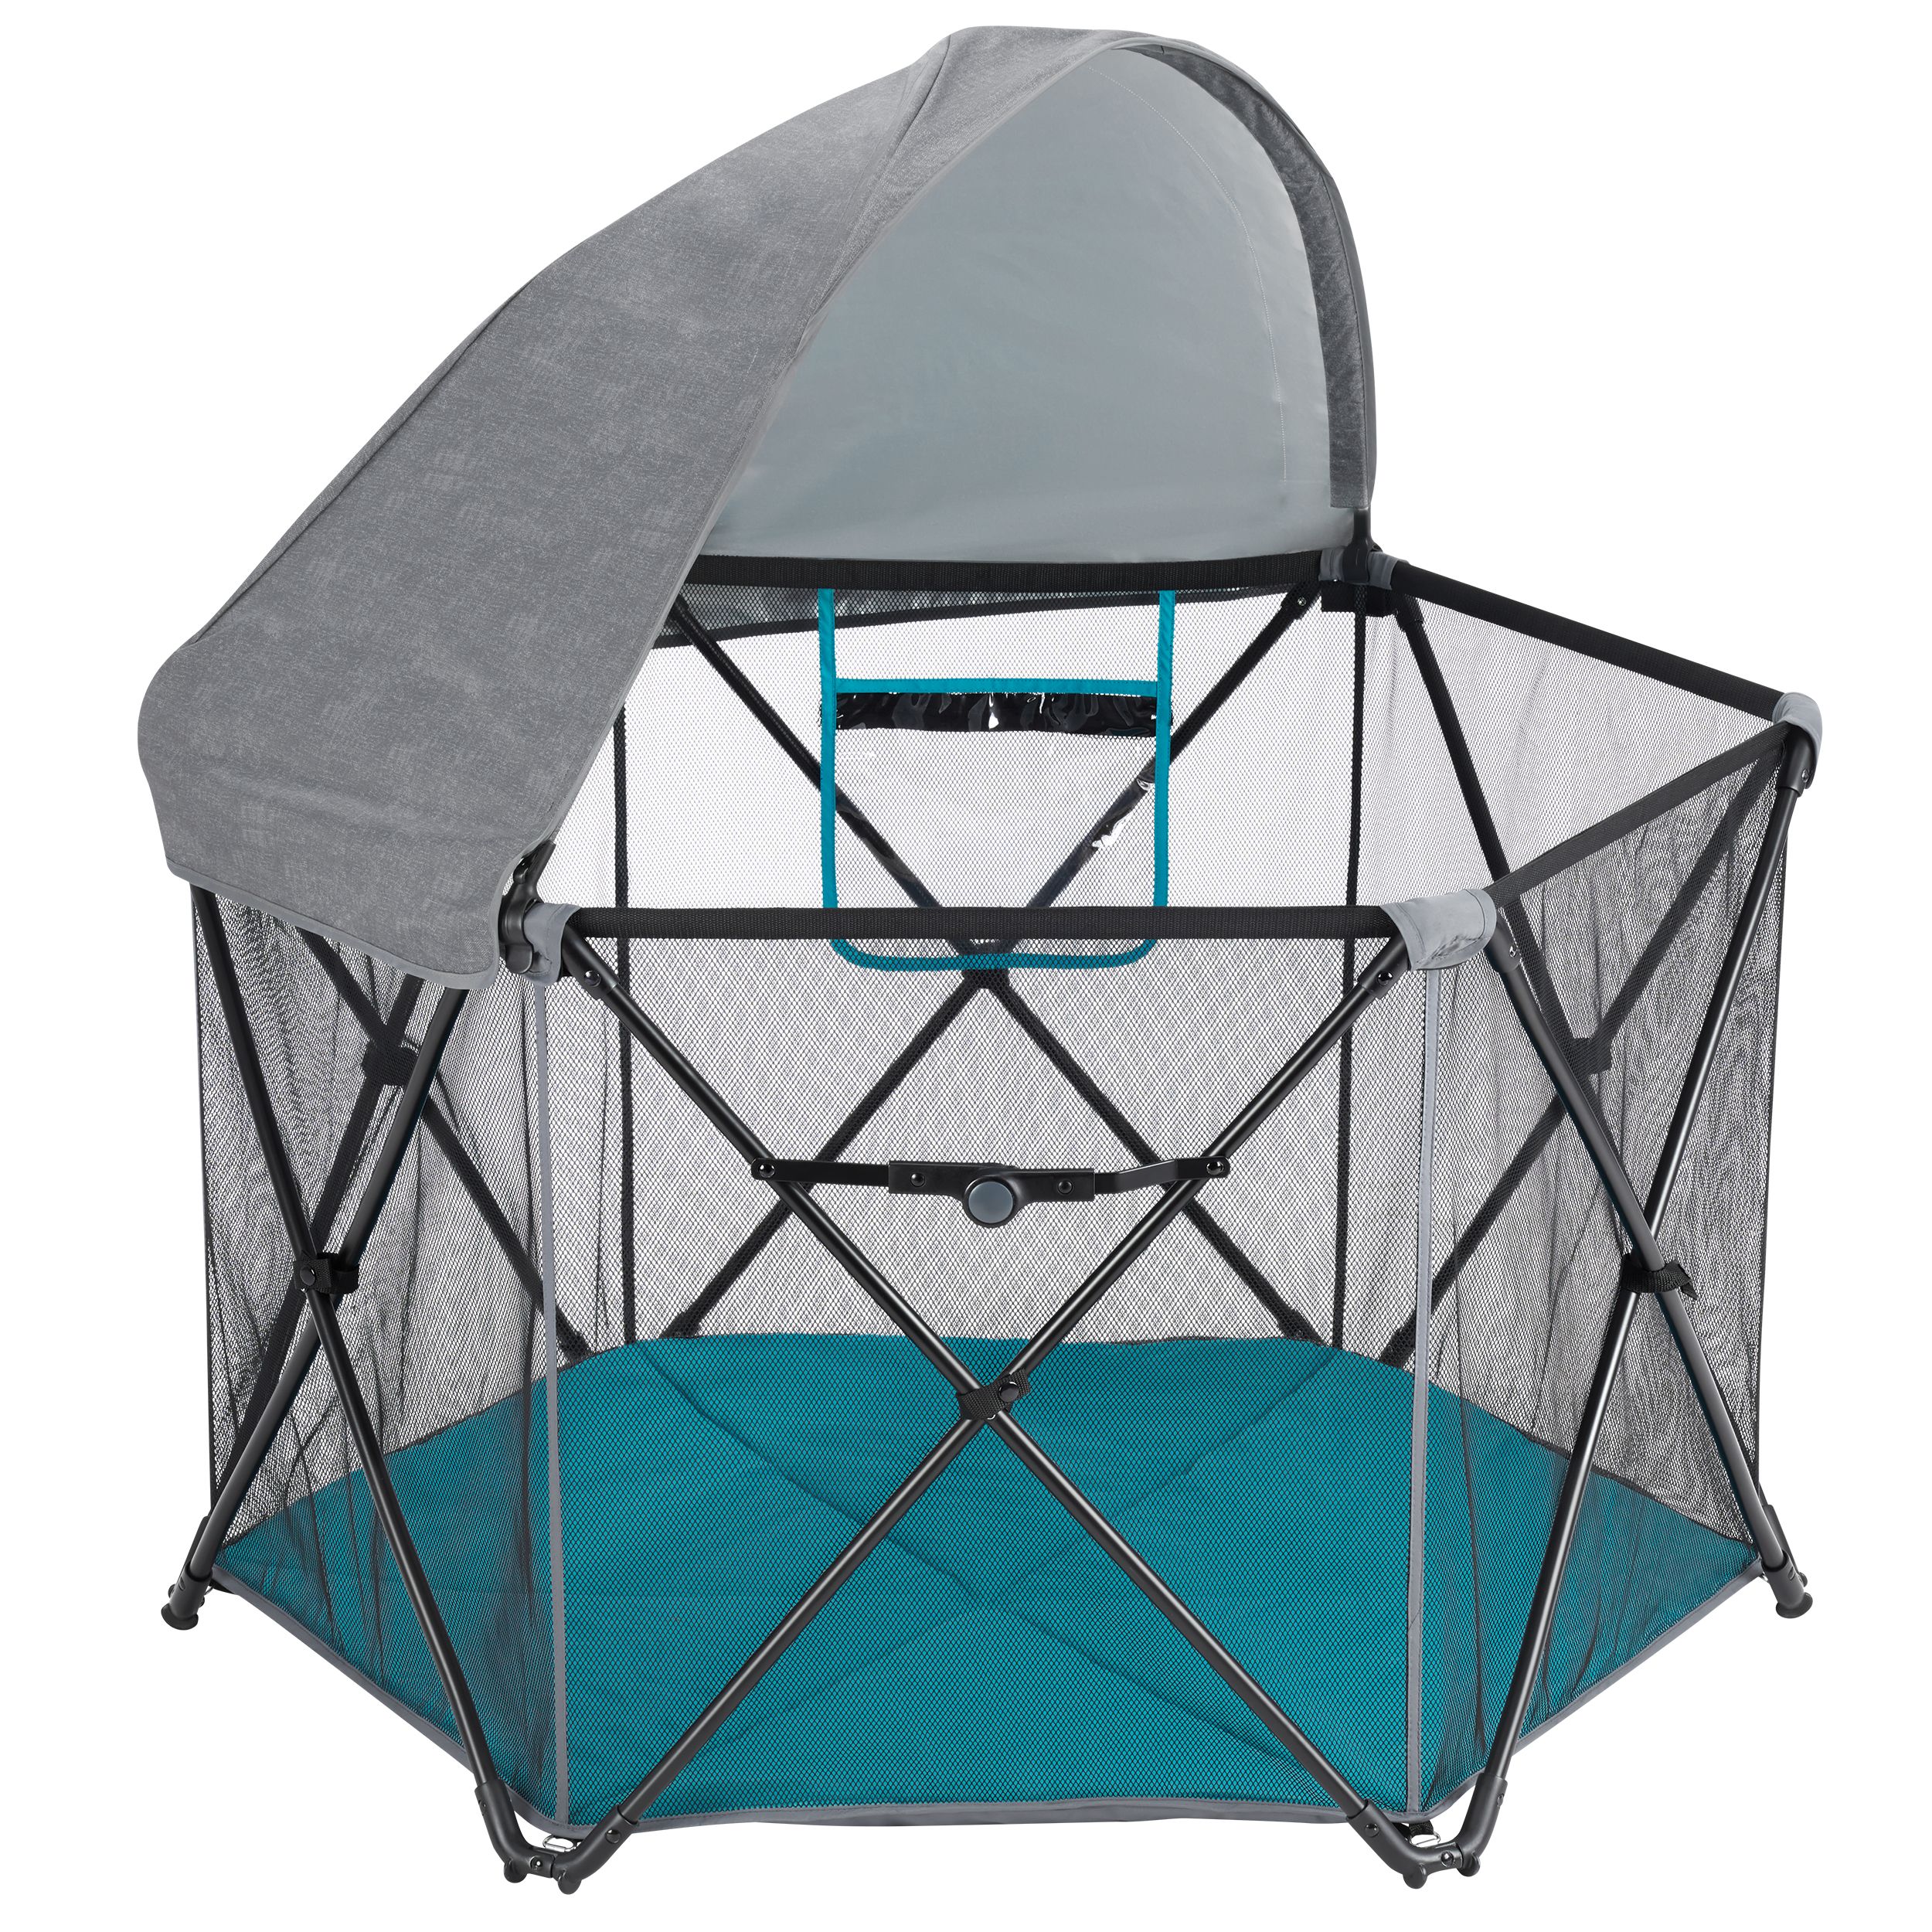 Evenflo Play Away Indoor and Outdoor Portable Playard with Canopy, Cedar Grove - image 3 of 15